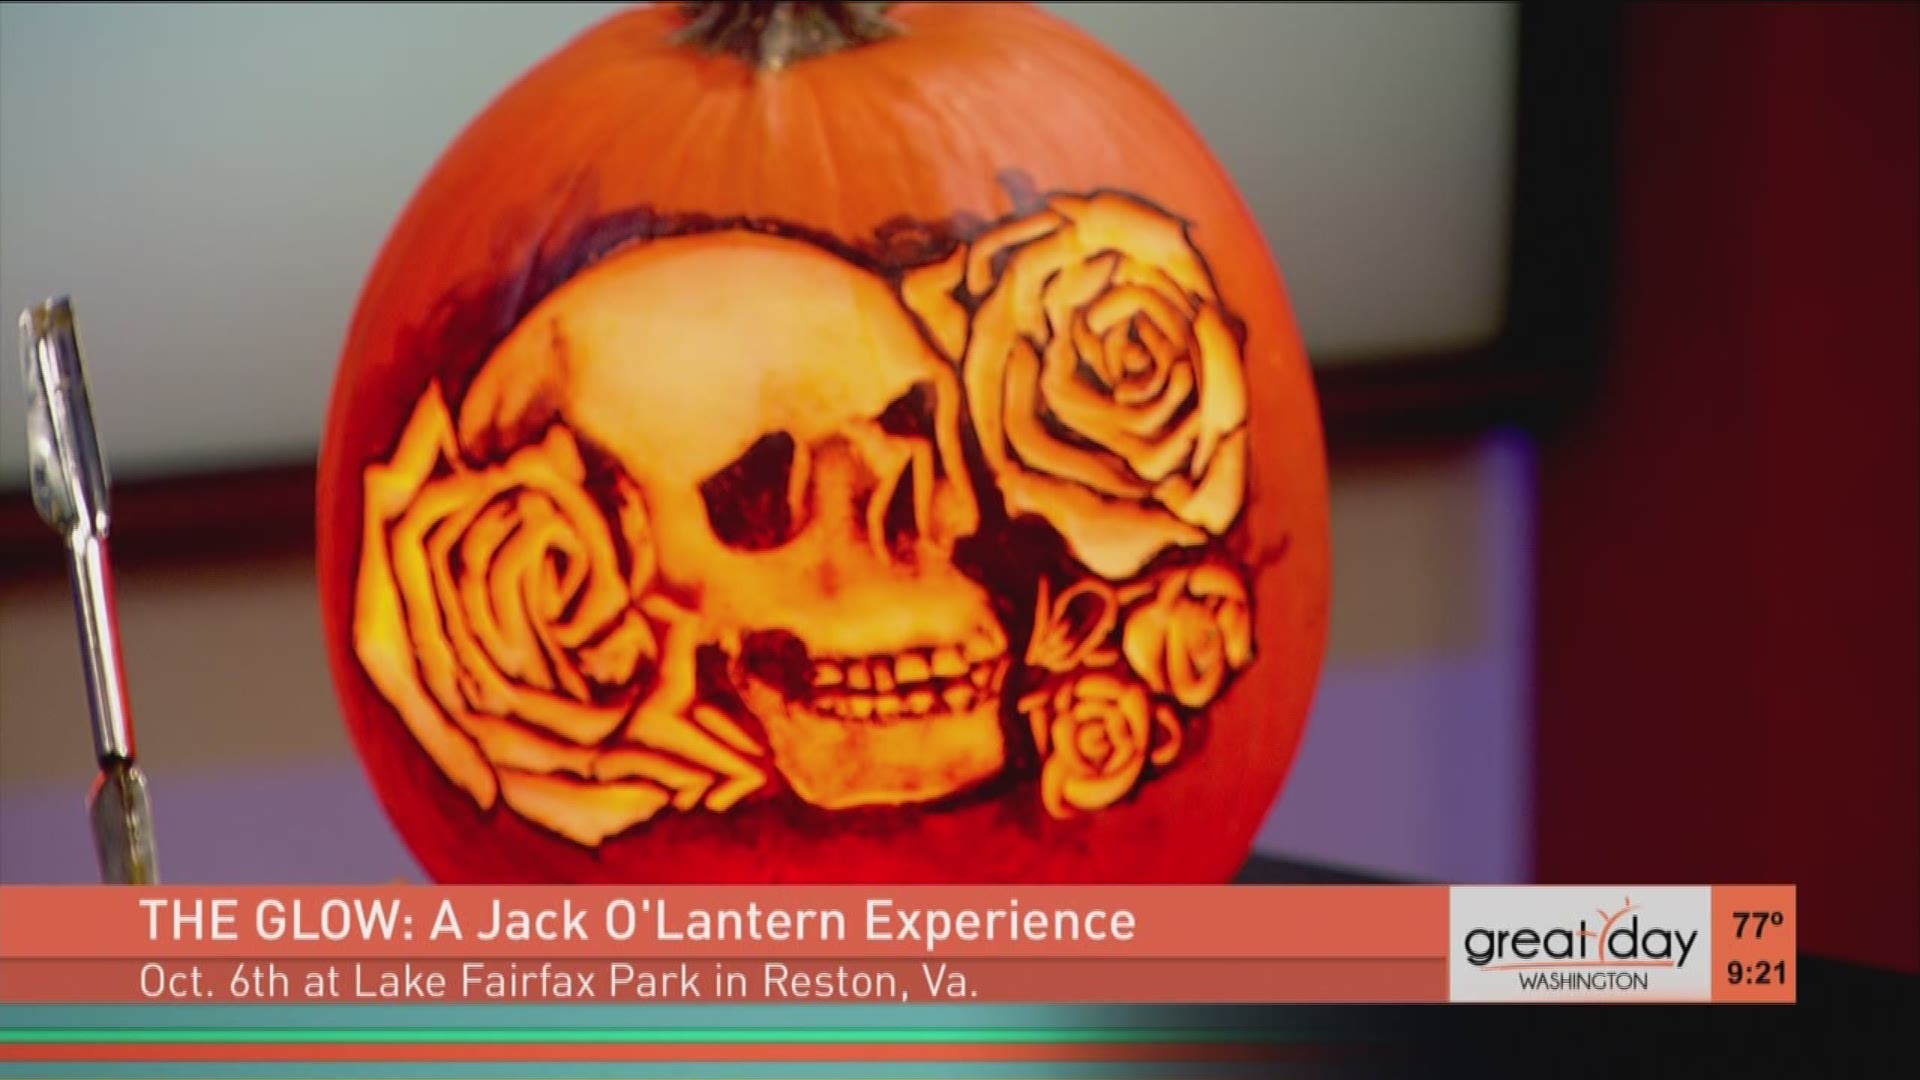 Bill Bywater, master carver and art director, tell us more about the event where you will see more than 5,000 hand carved pumpkins. The Glow: A Jack O'Lantern Experience is on October 6 at Lake Fairfax Park in Reston, Va. 